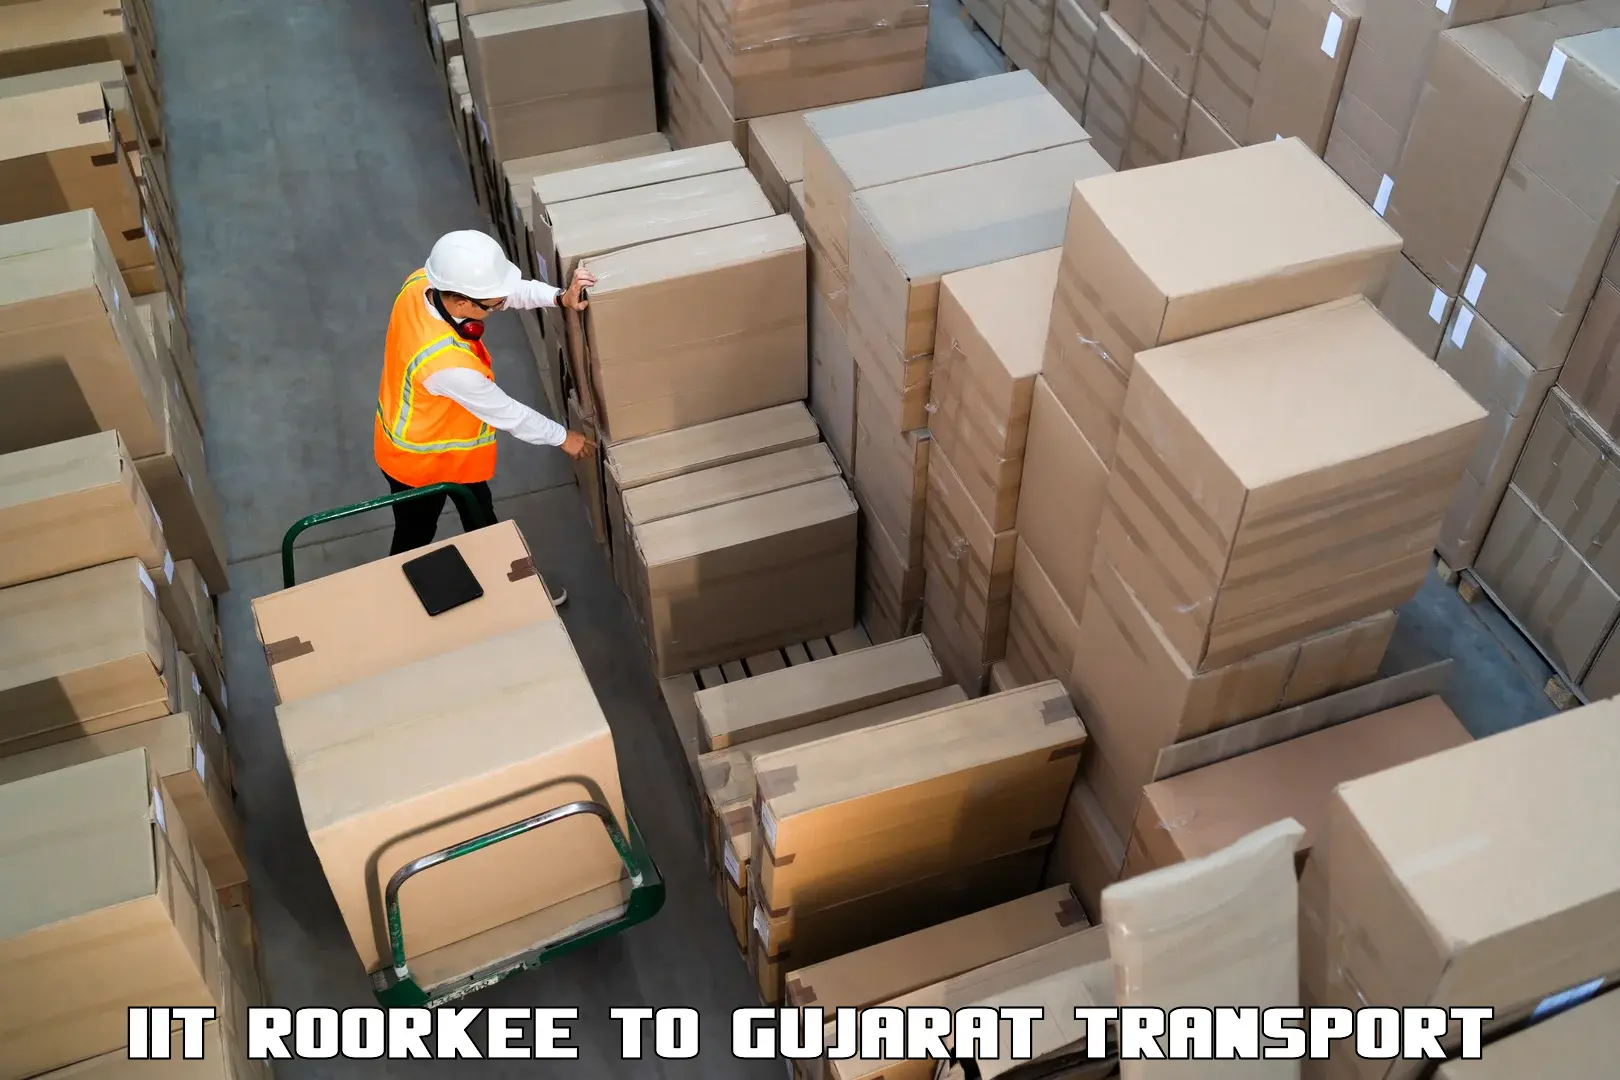 Lorry transport service IIT Roorkee to GIDC